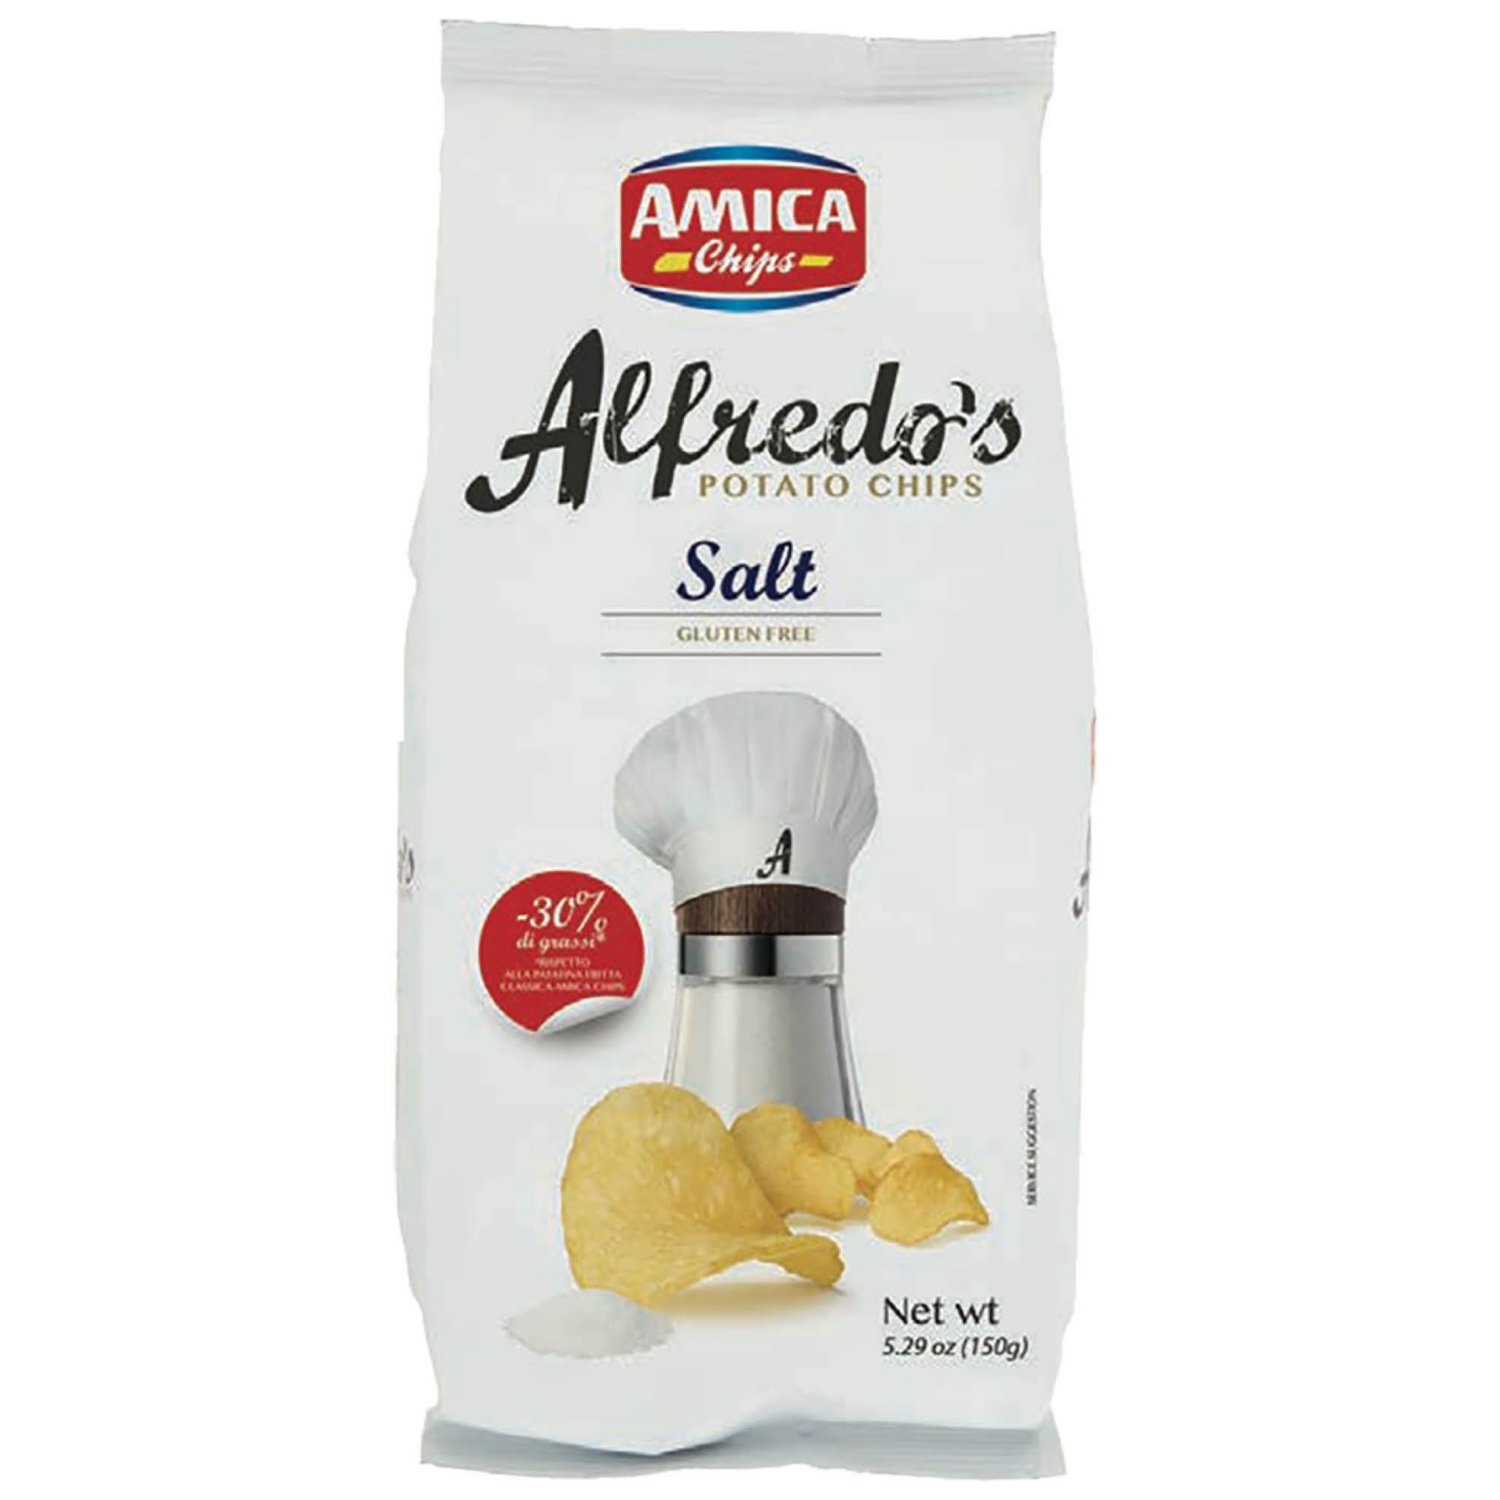 AMICA CHIPS Alfredo's Chips